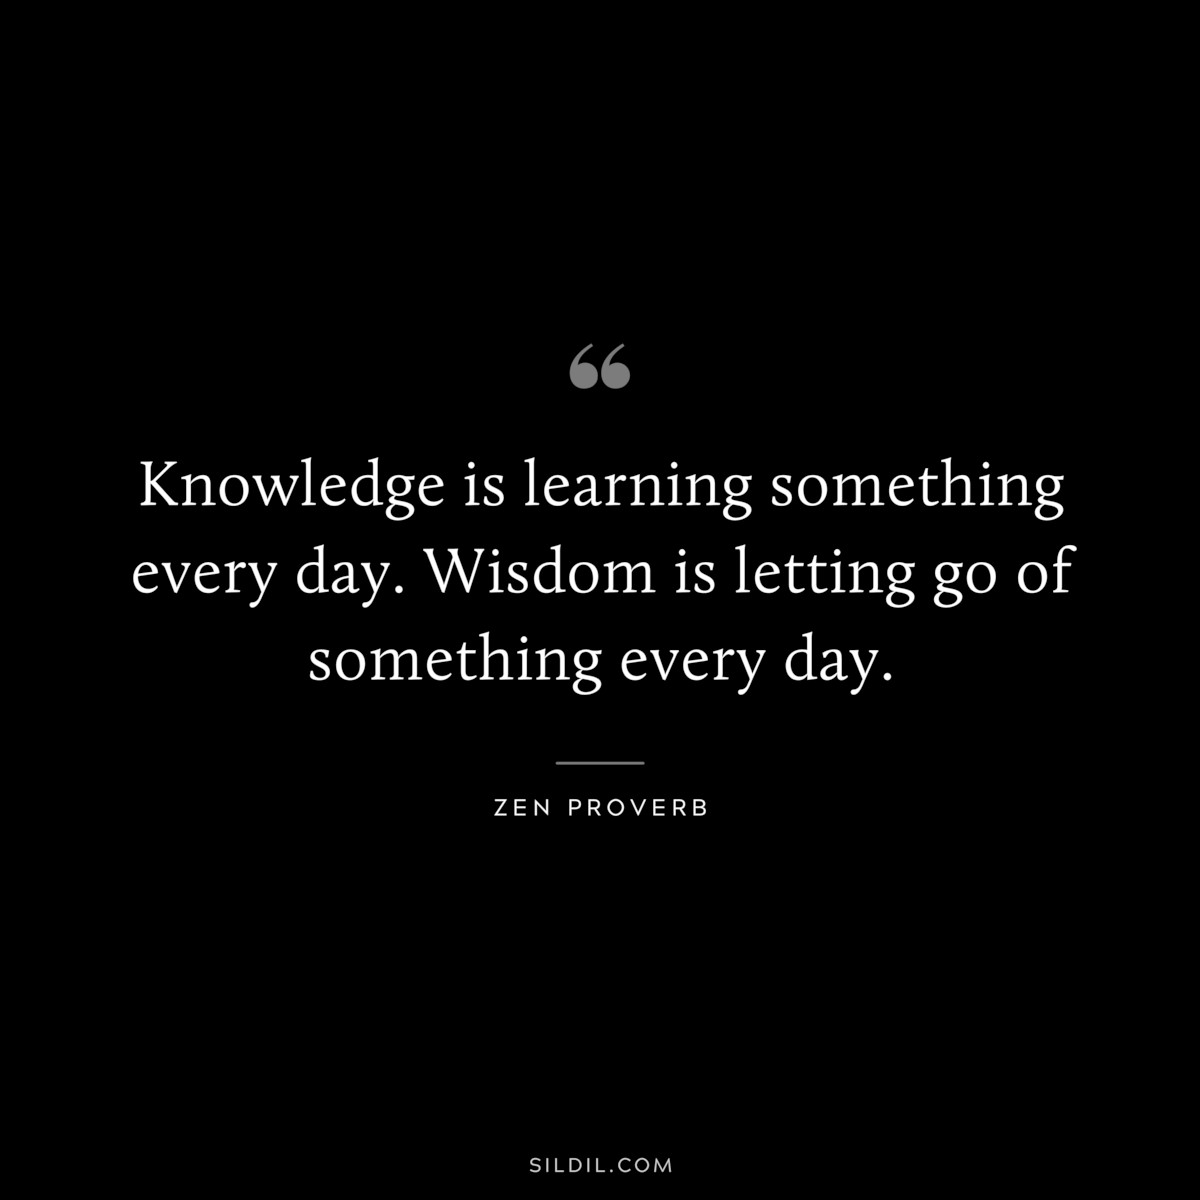 Knowledge is learning something every day. Wisdom is letting go of something every day. ― Zen Proverb